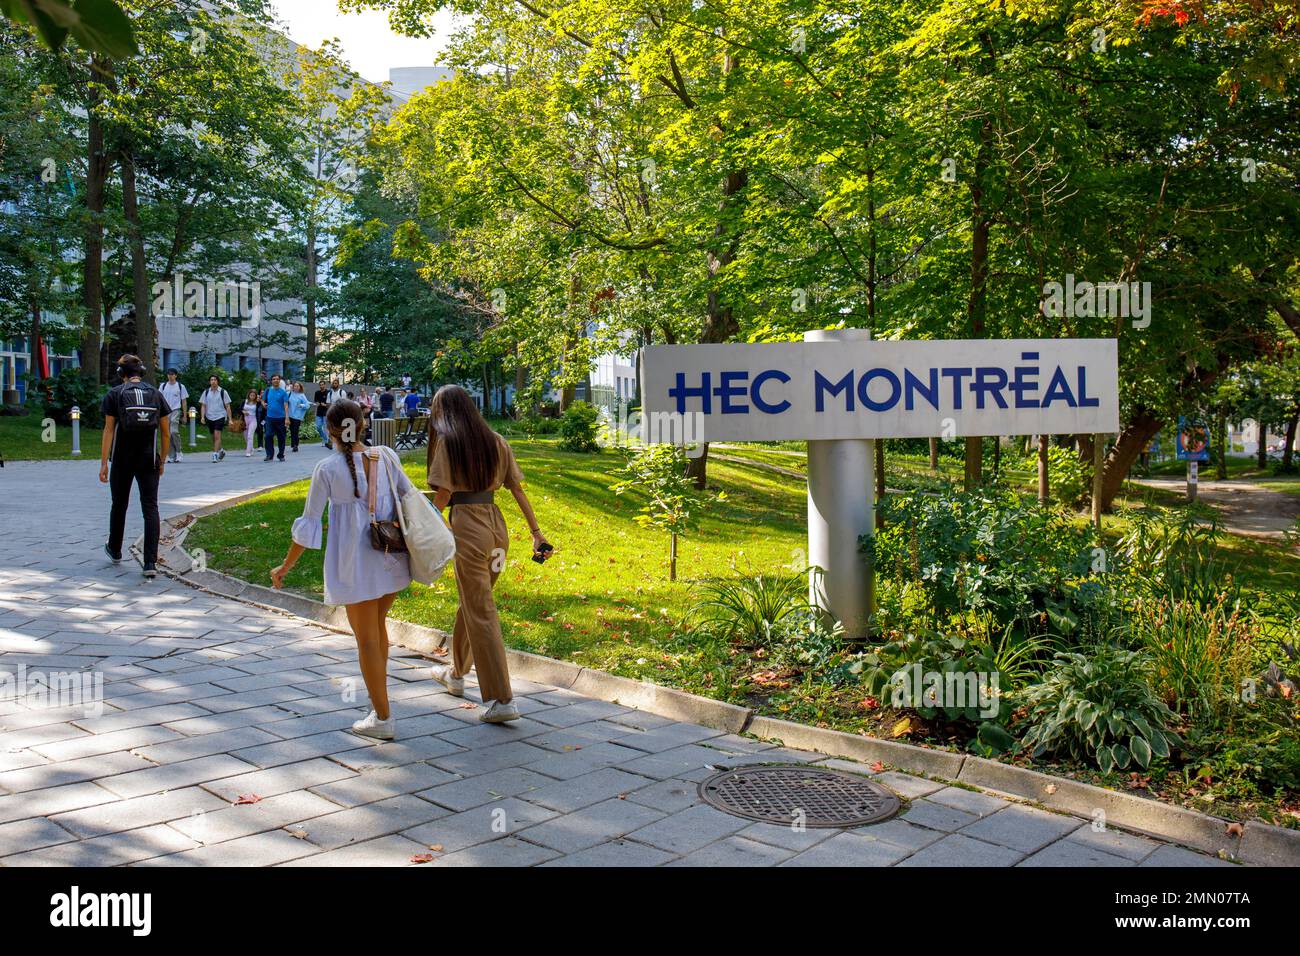 Canada, province of Quebec, Montreal, University of Montreal, HEC Montreal business school, students Stock Photo